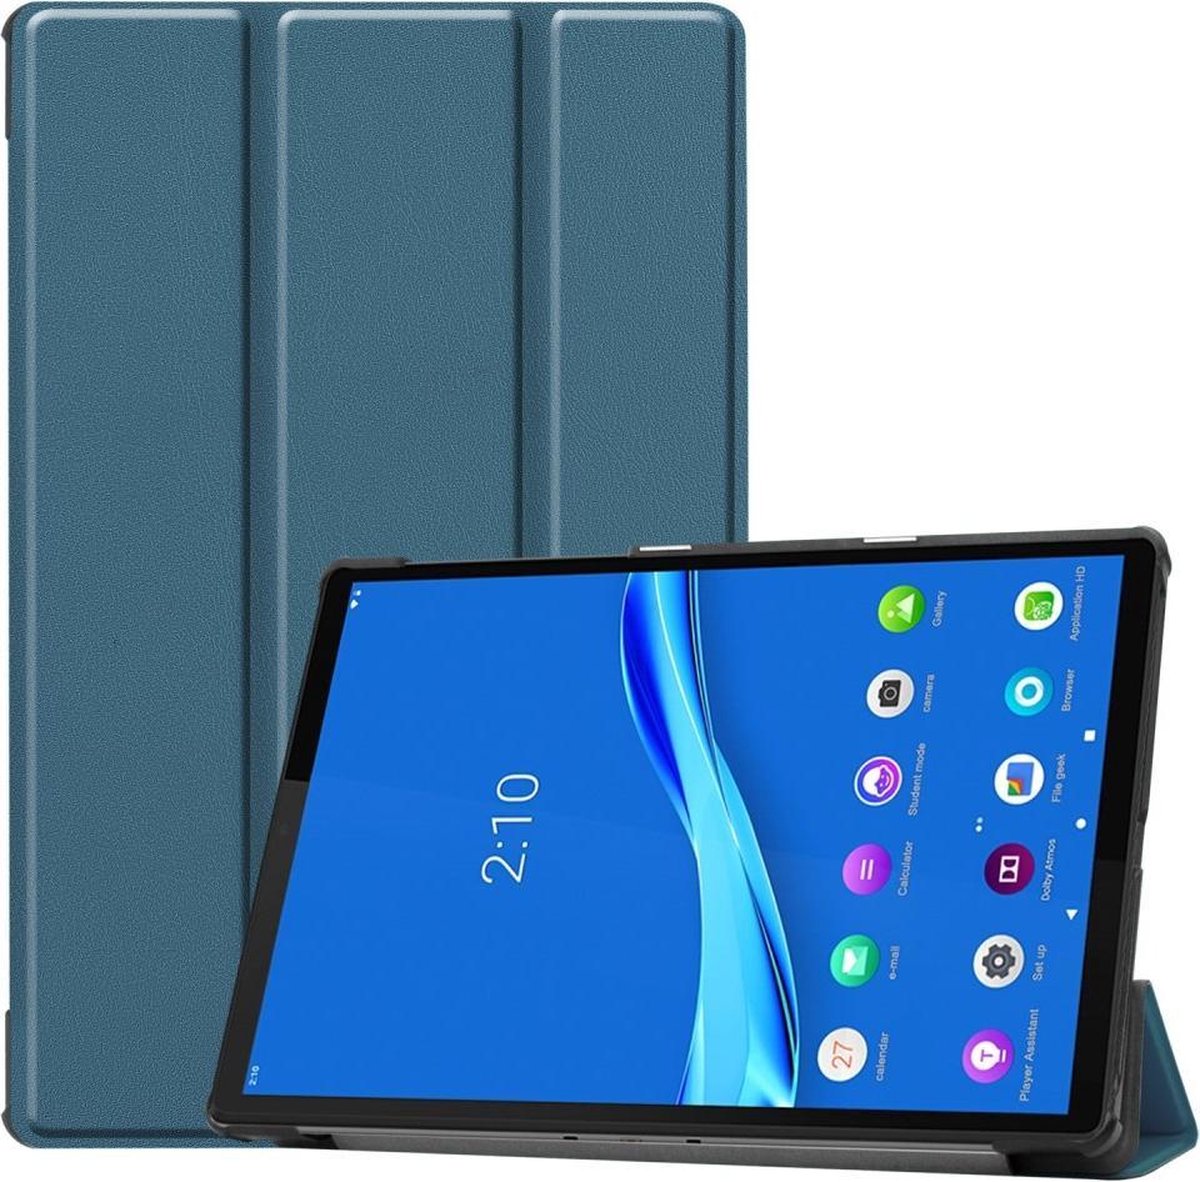 3-Vouw sleepcover hoes - Lenovo Tab M10 FHD Plus (x606F) - Donkergroen